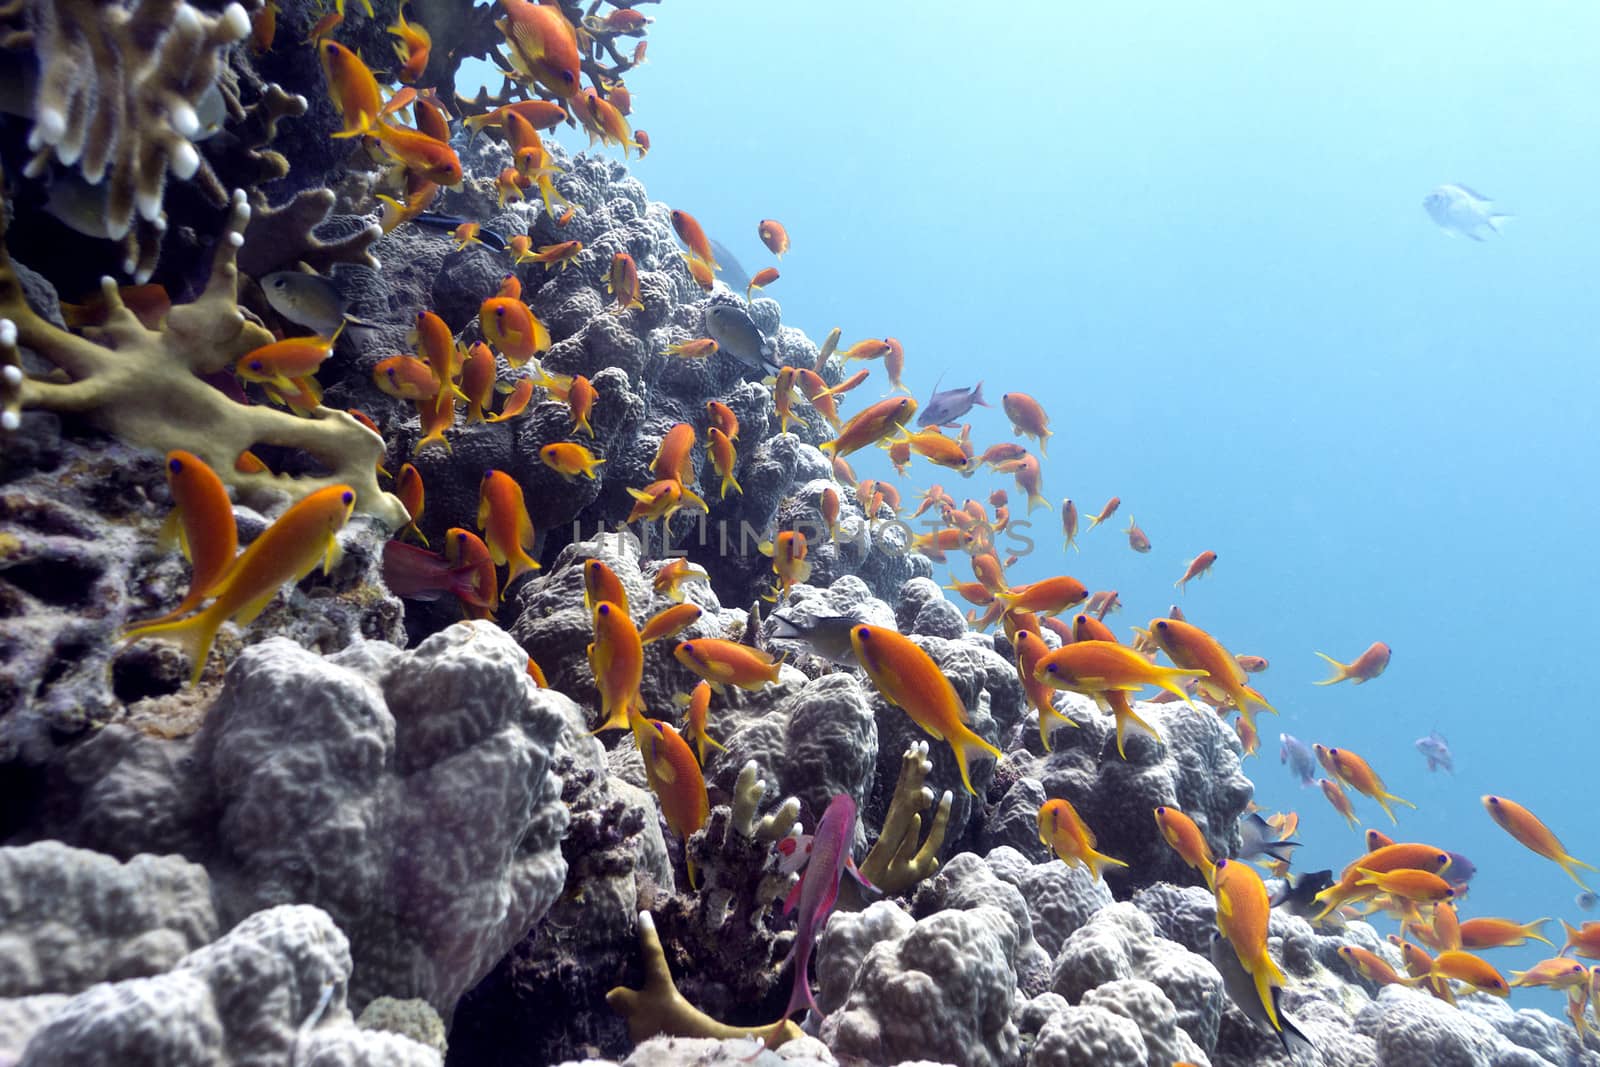 coral reef with hard corals and exotic fishes Anthias at the bottom of tropical sea on blue water background